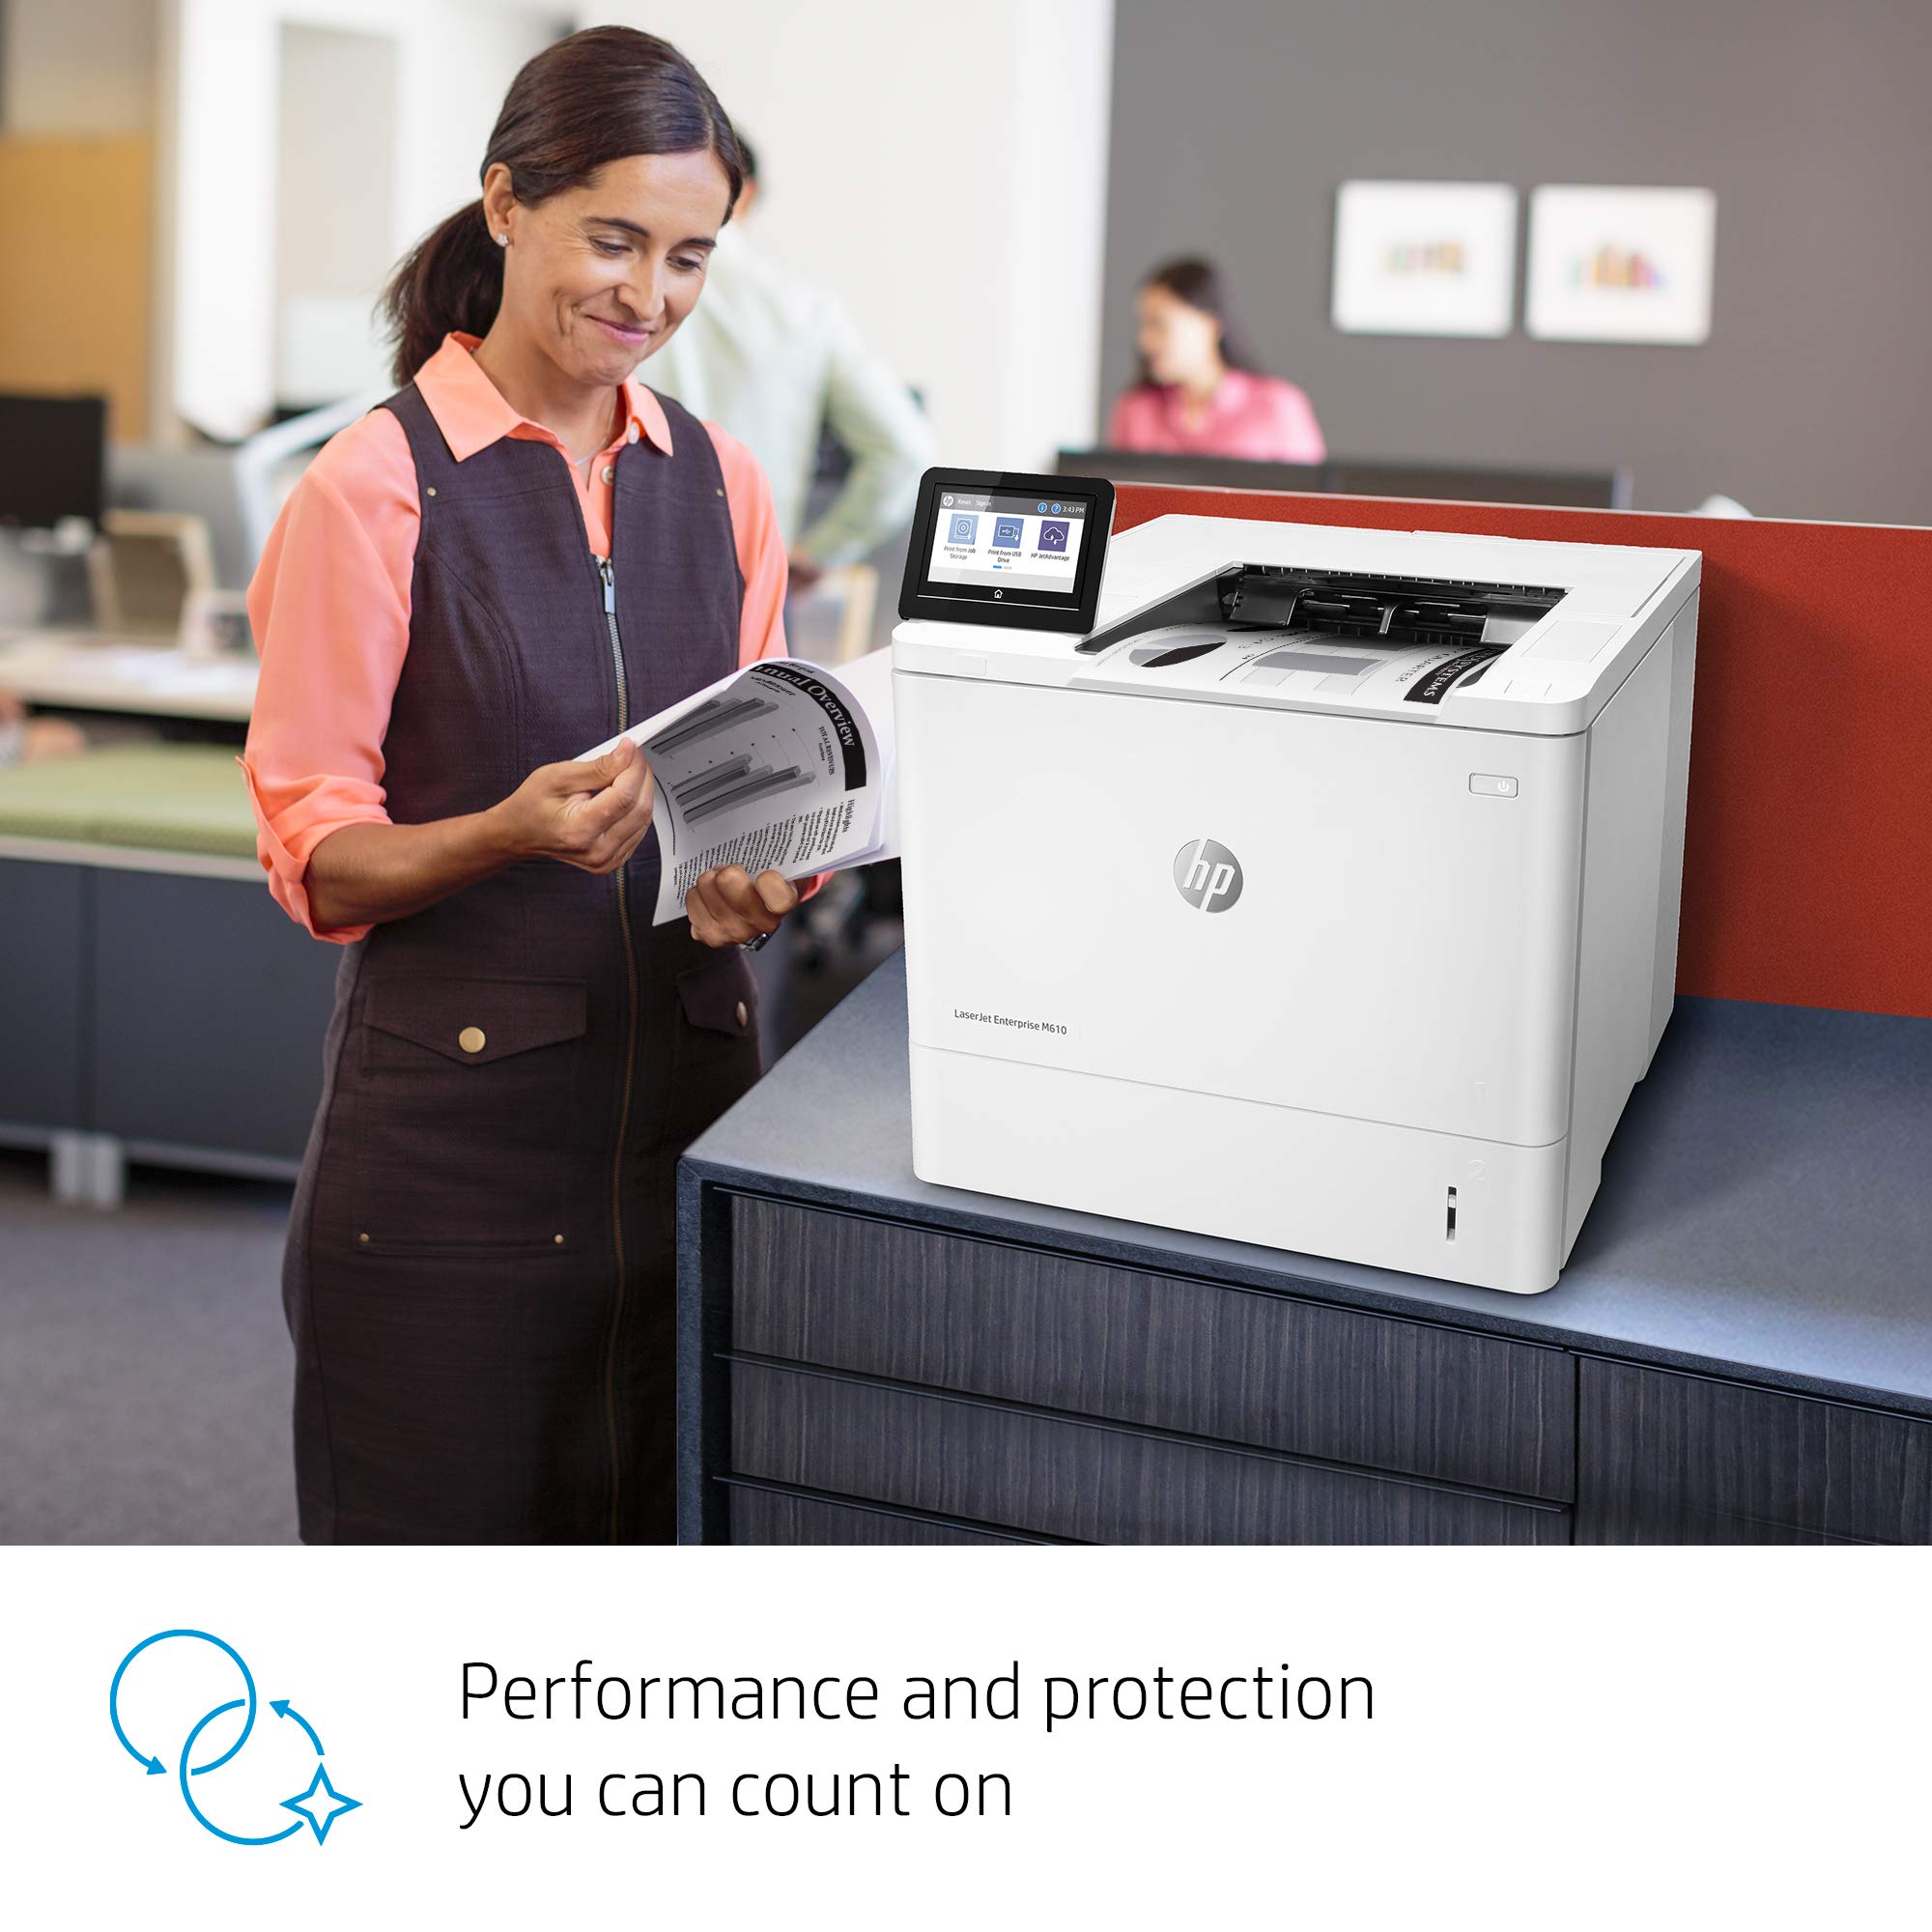 HP LaserJet Enterprise M610dn Monochrome Printer with built-in Ethernet & 2-sided printing (7PS82A), White